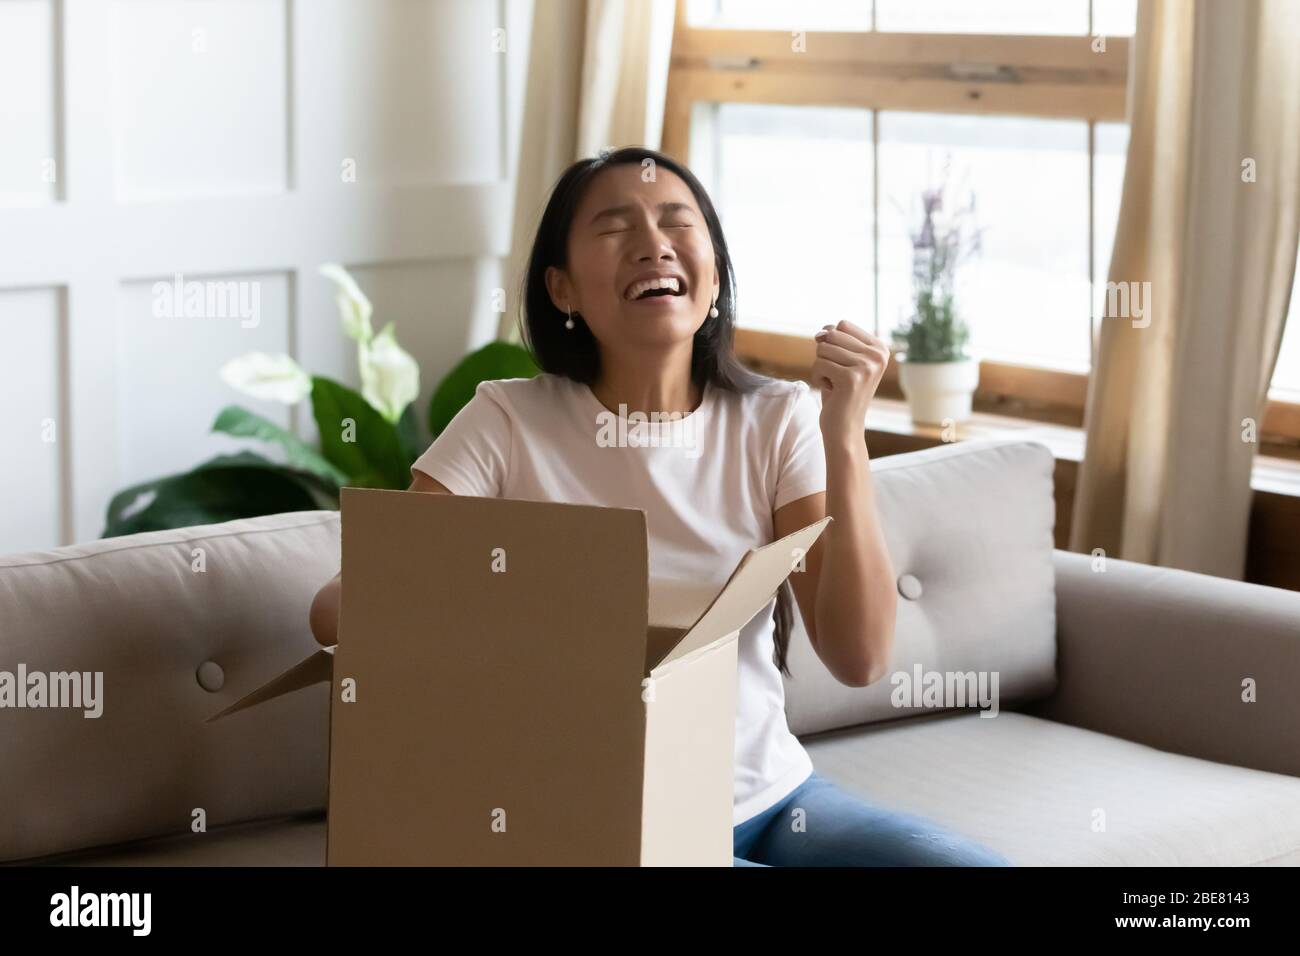 Asian woman sitting on sofa opens delivered parcel feels overjoyed Stock Photo